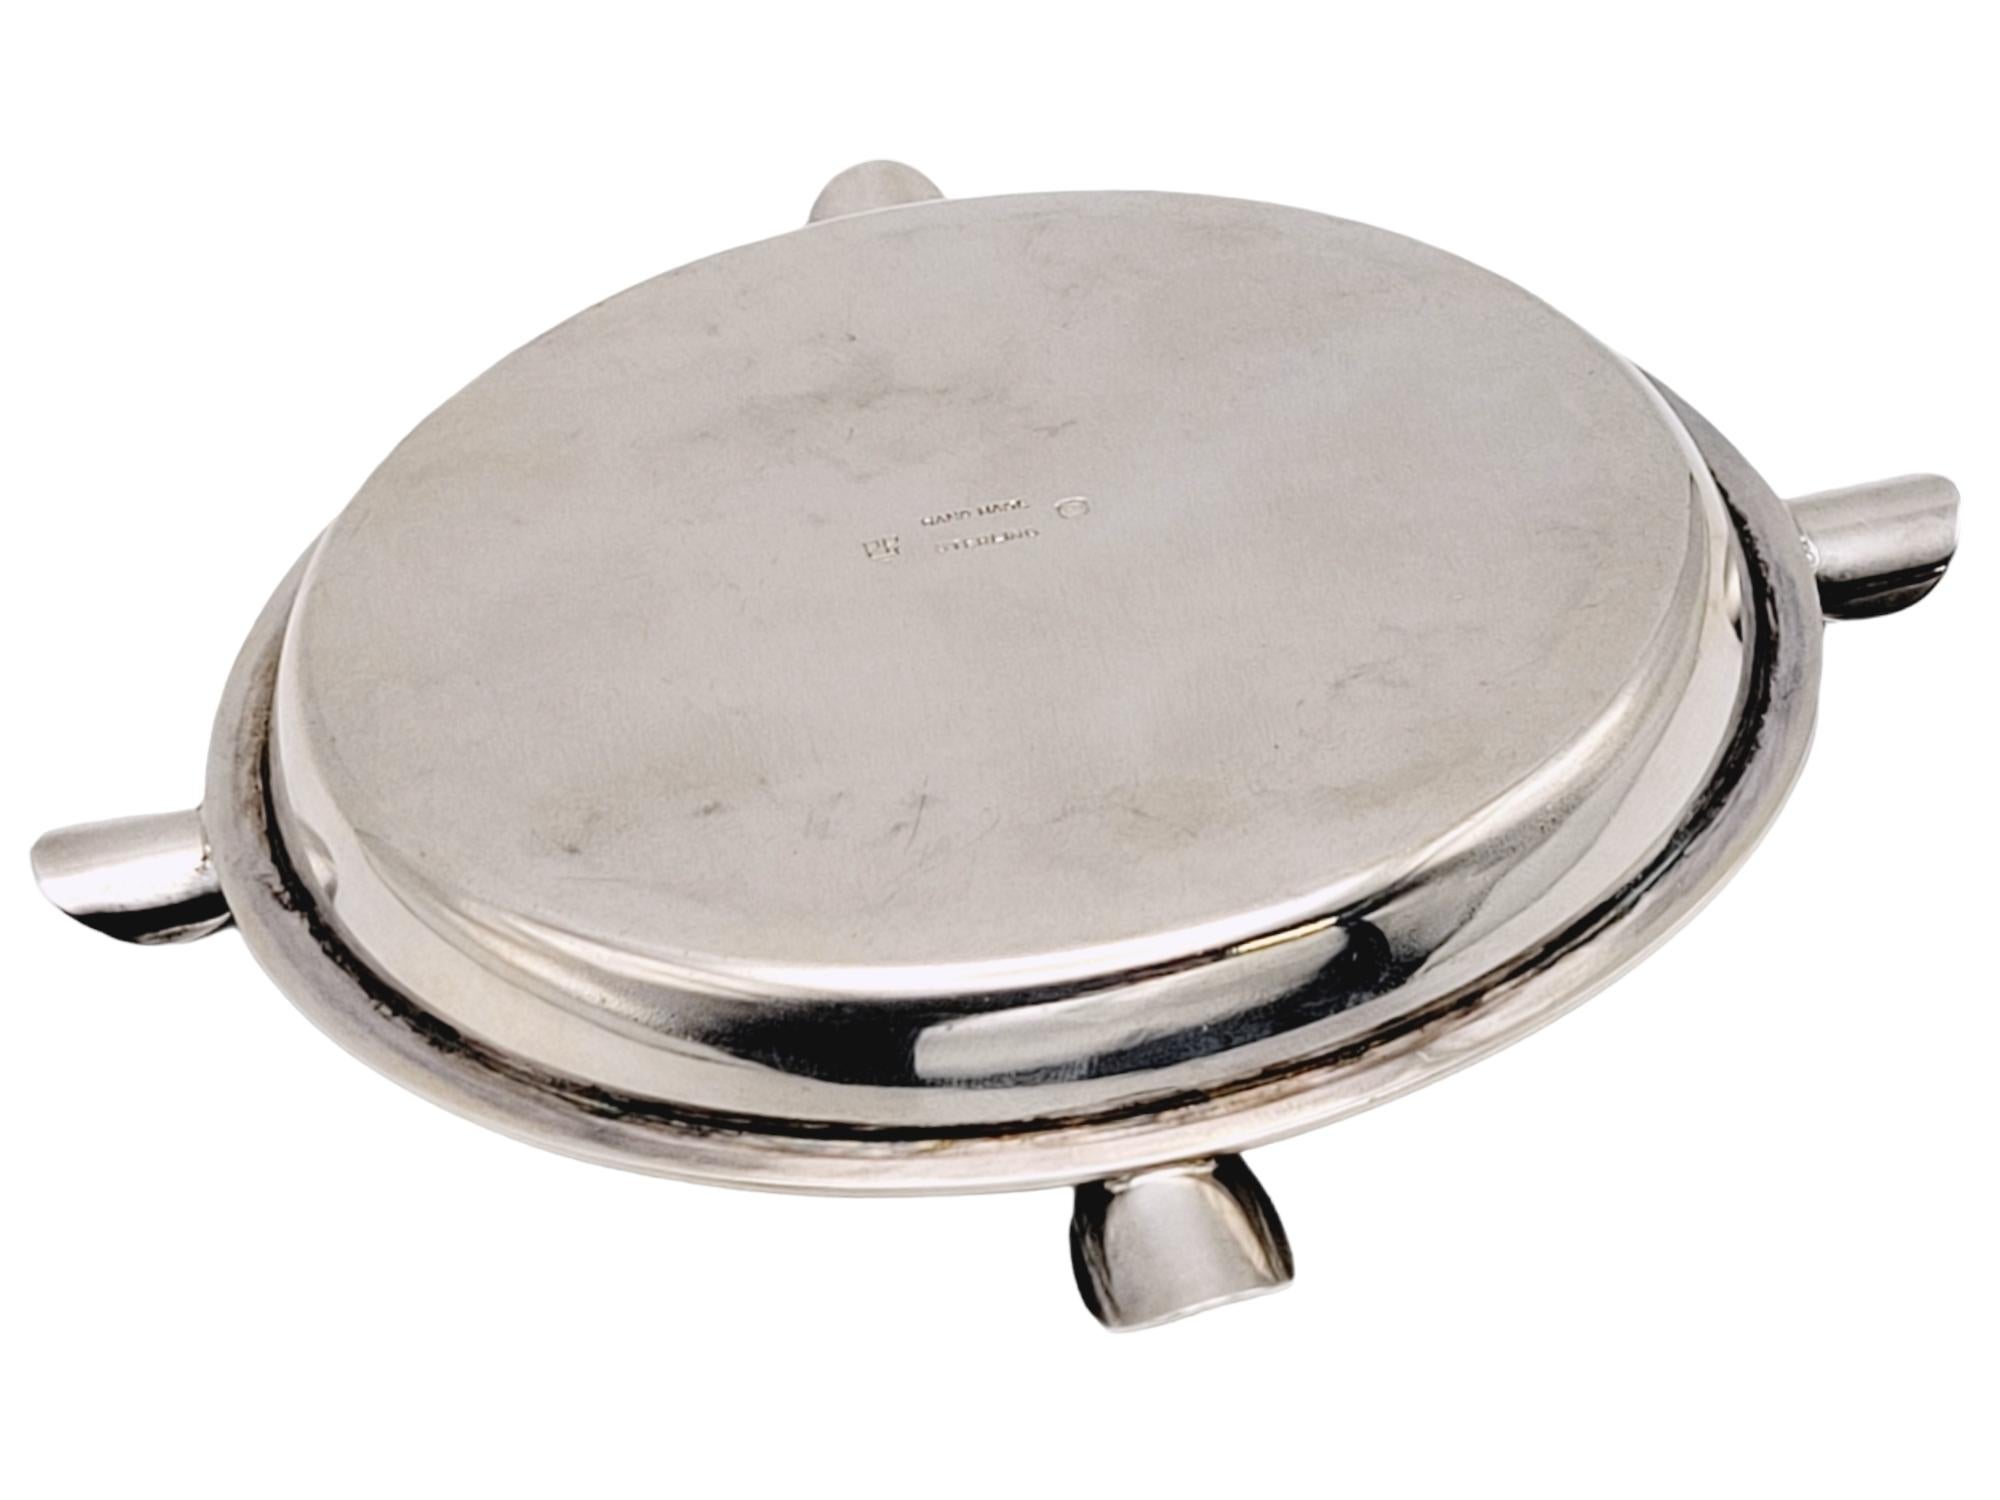 Carl Poul Petersen Polished Modern Ashtray in Sterling Silver, circa 1940-1970 For Sale 2